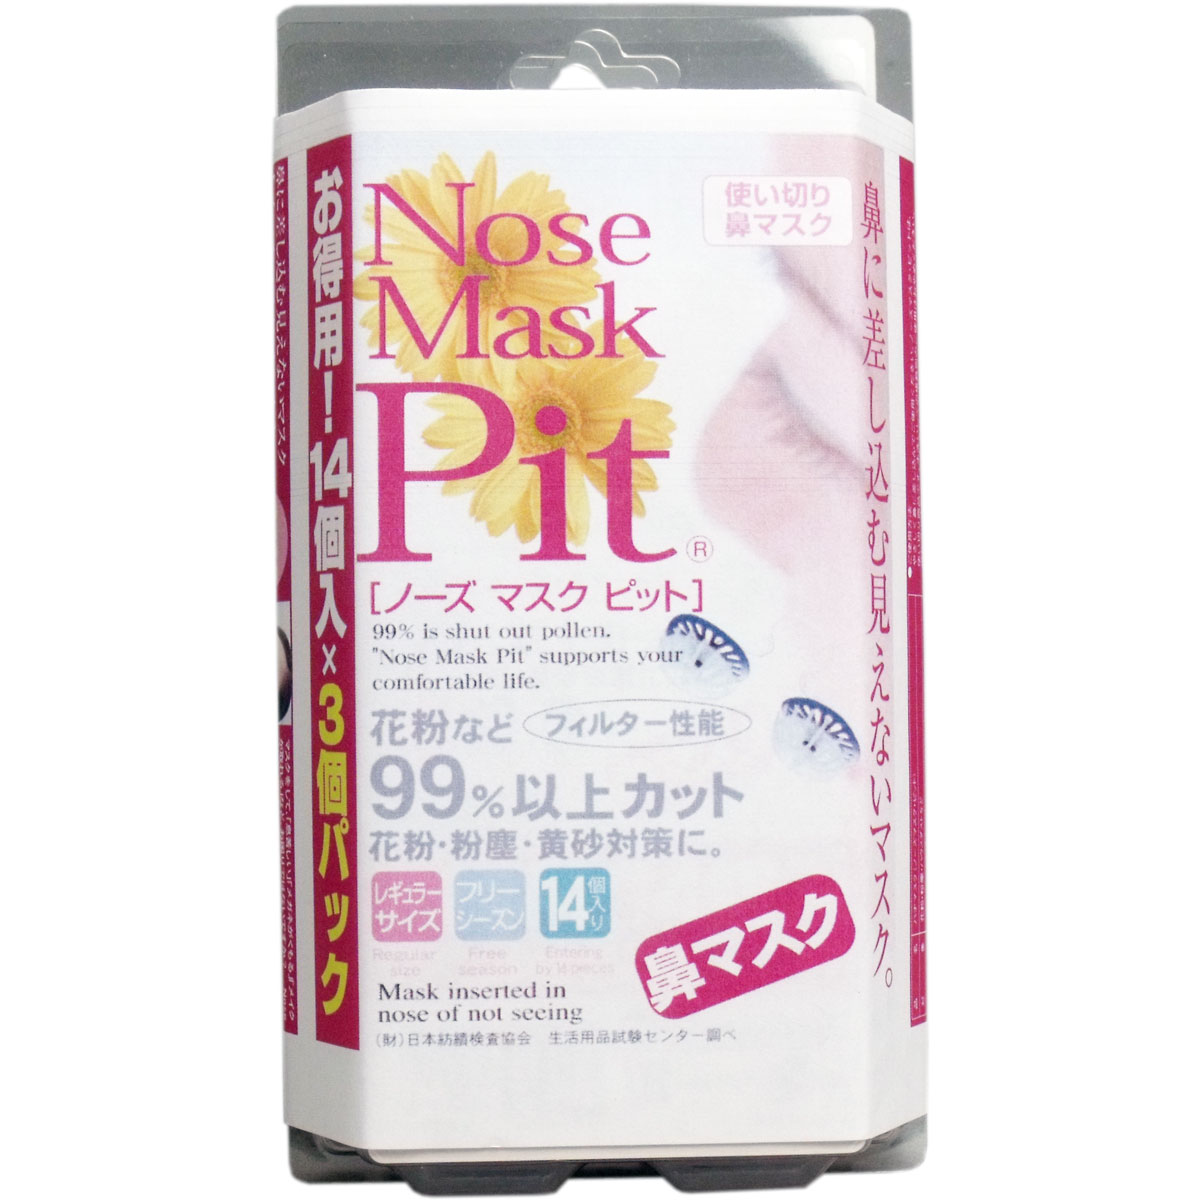 Picture of Nose Mask Pit 14 pairs × 3 packs